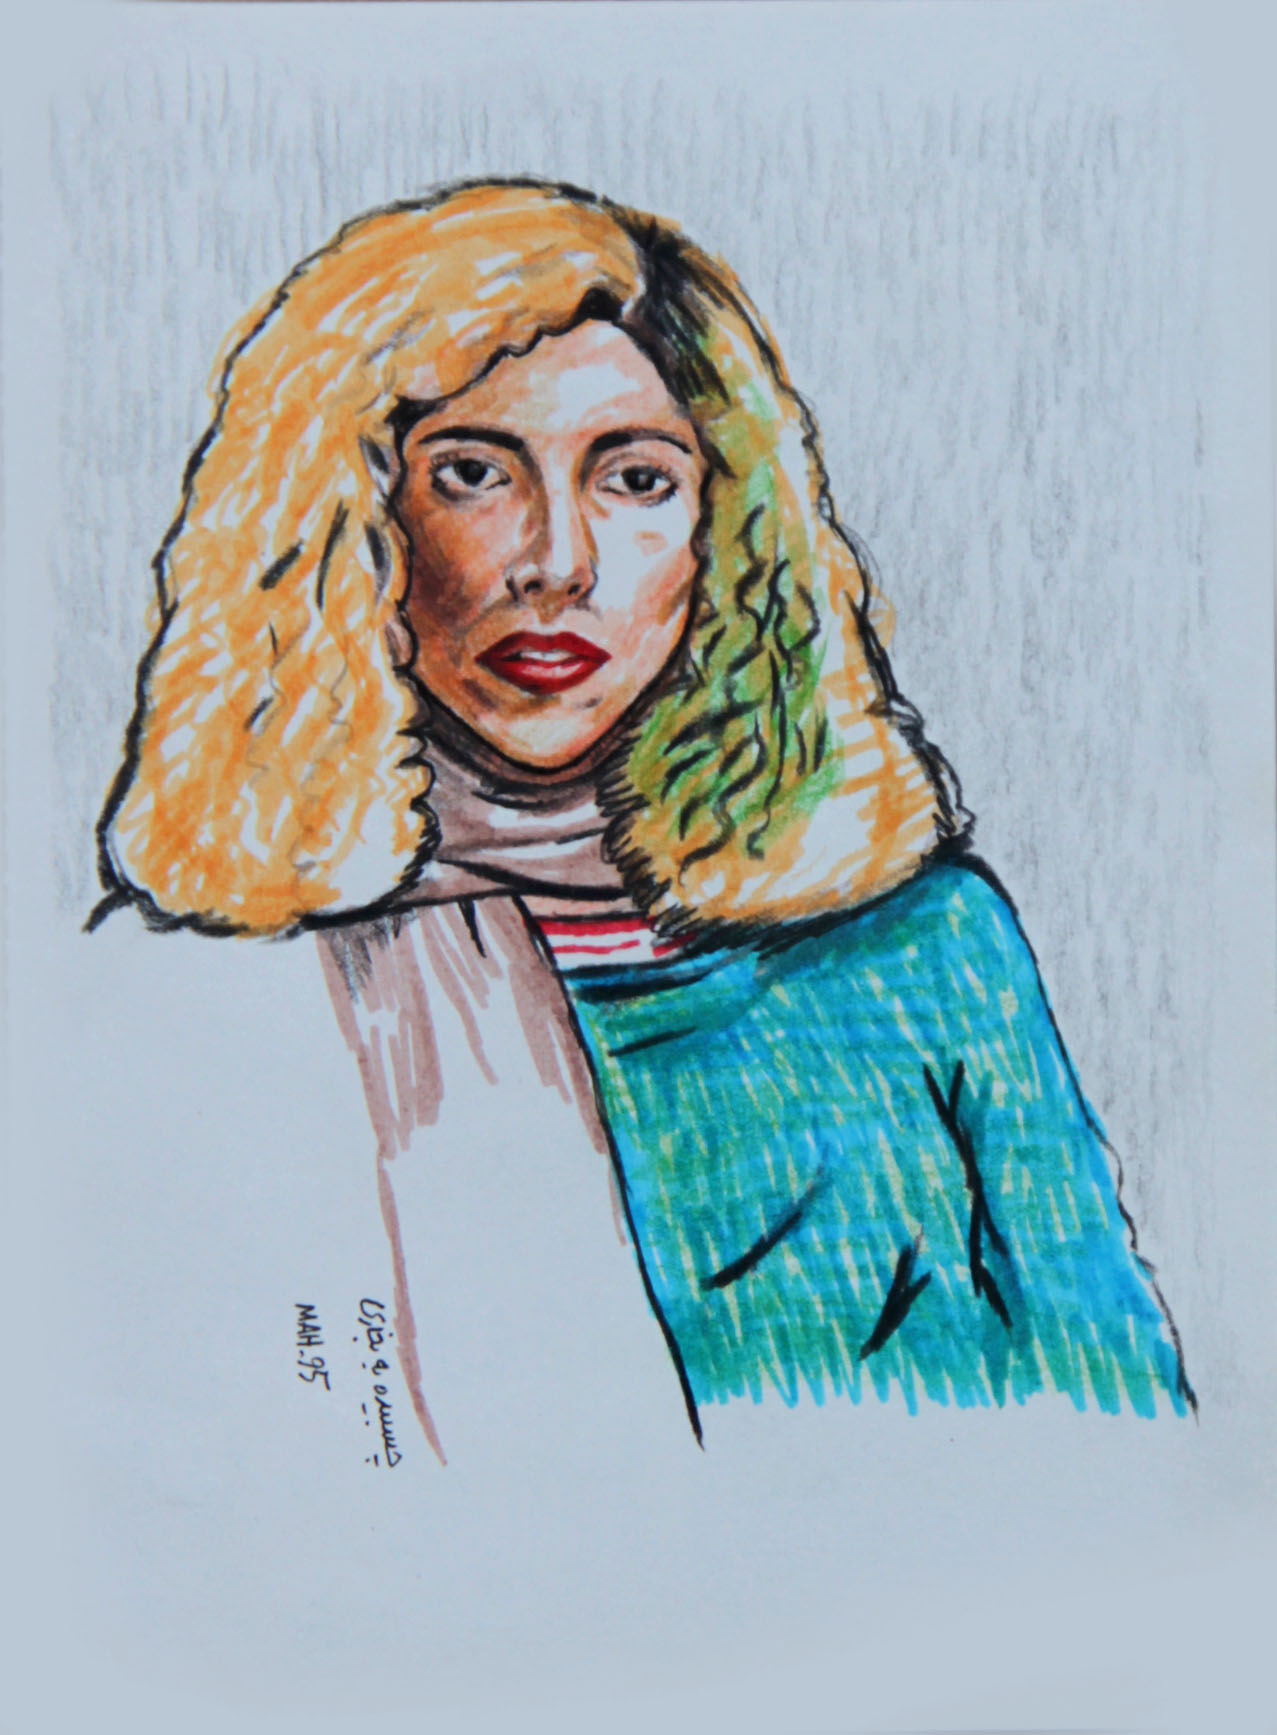 Self-portrait, 2016, Marker and colored pencil on paper, 11.5 x 16 cm